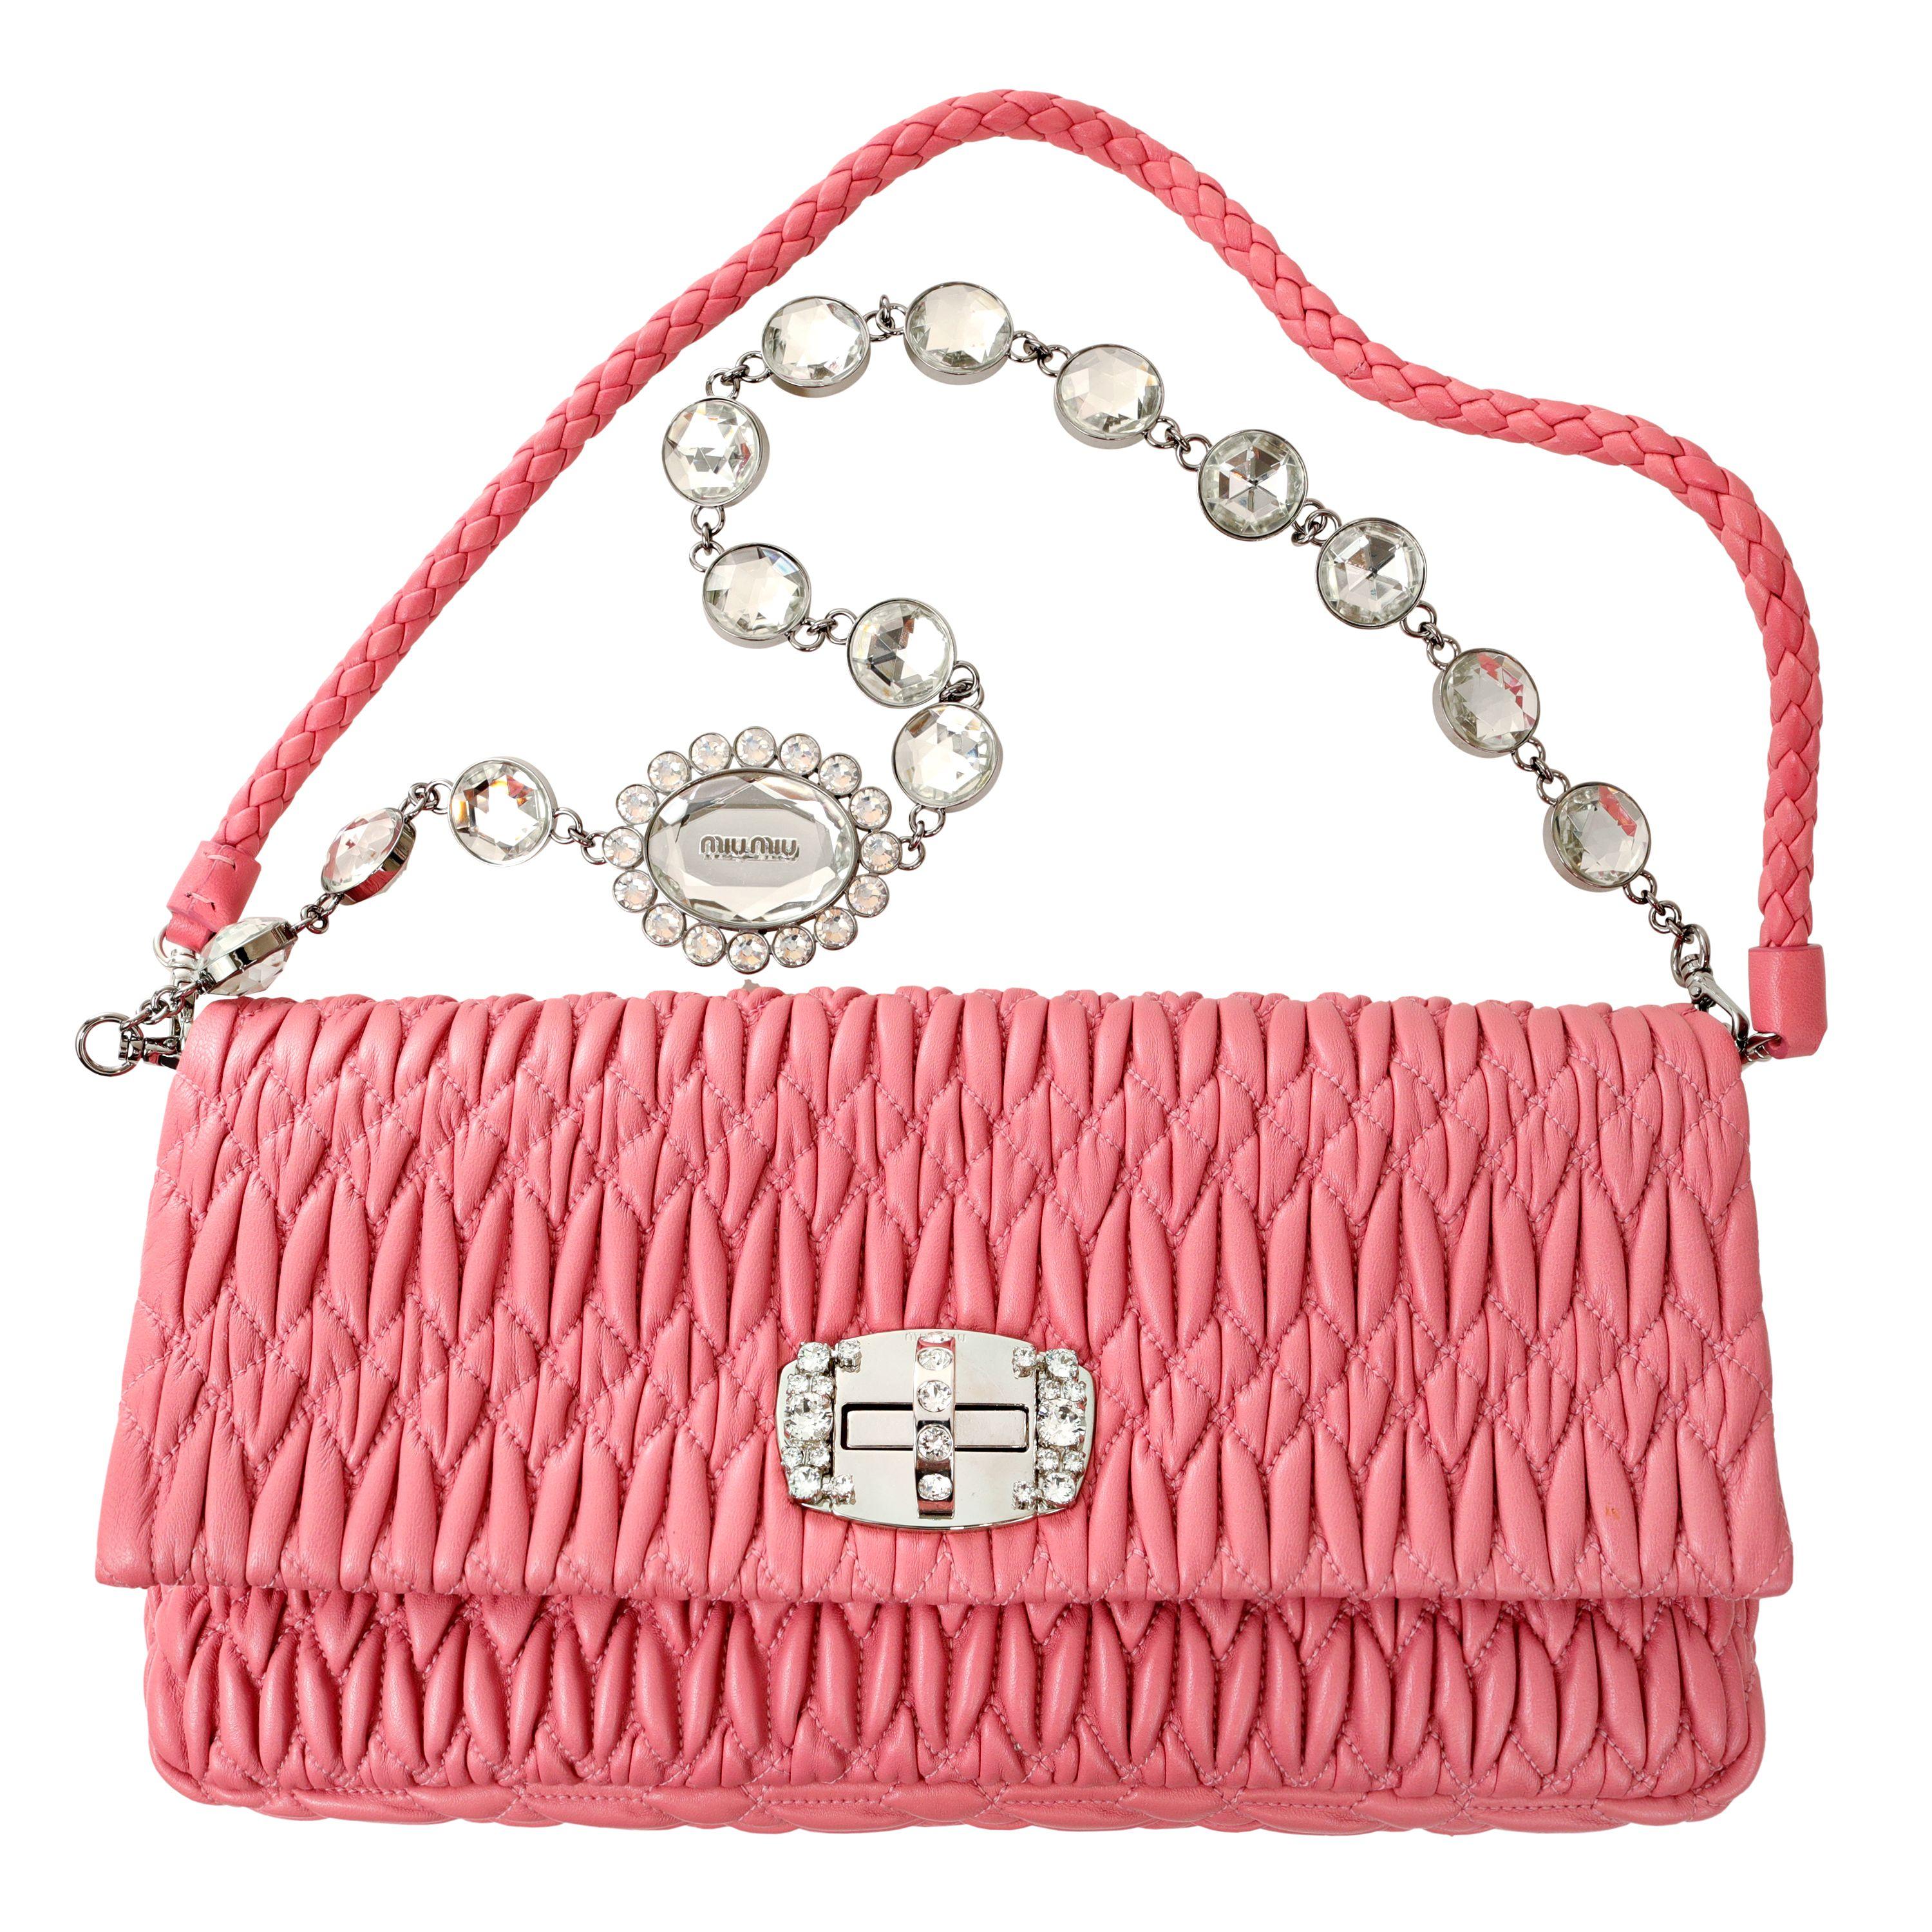 Miu Miu Rose Pink Iconic Crystal Cloquè Small Bag with Silver Hardware In Excellent Condition For Sale In Palm Beach, FL